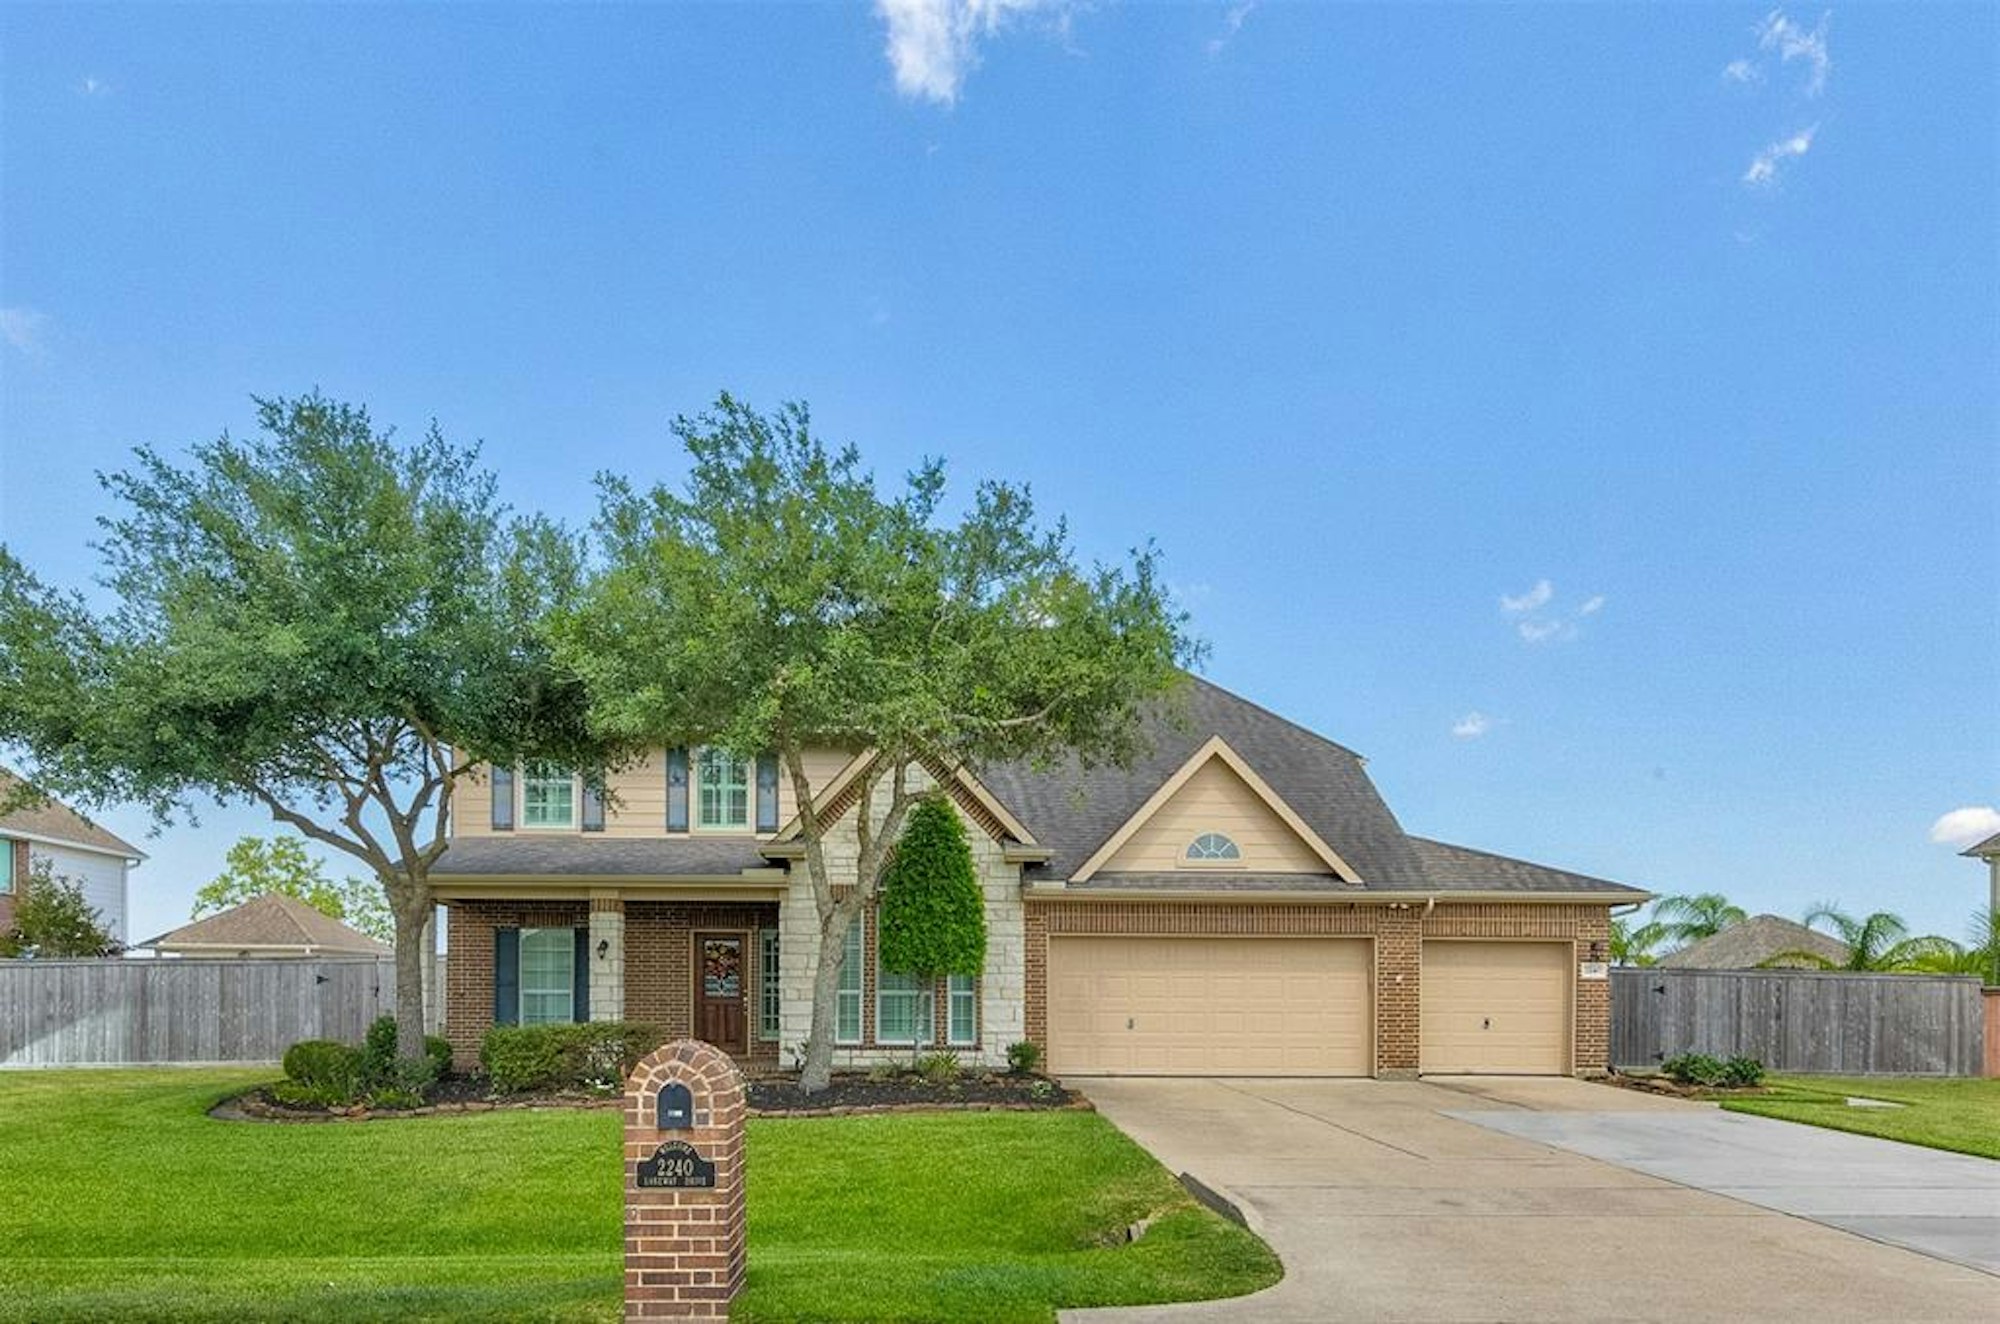 Photo 1 of 50 - 2240 Lakeway Dr, Friendswood, TX 77546